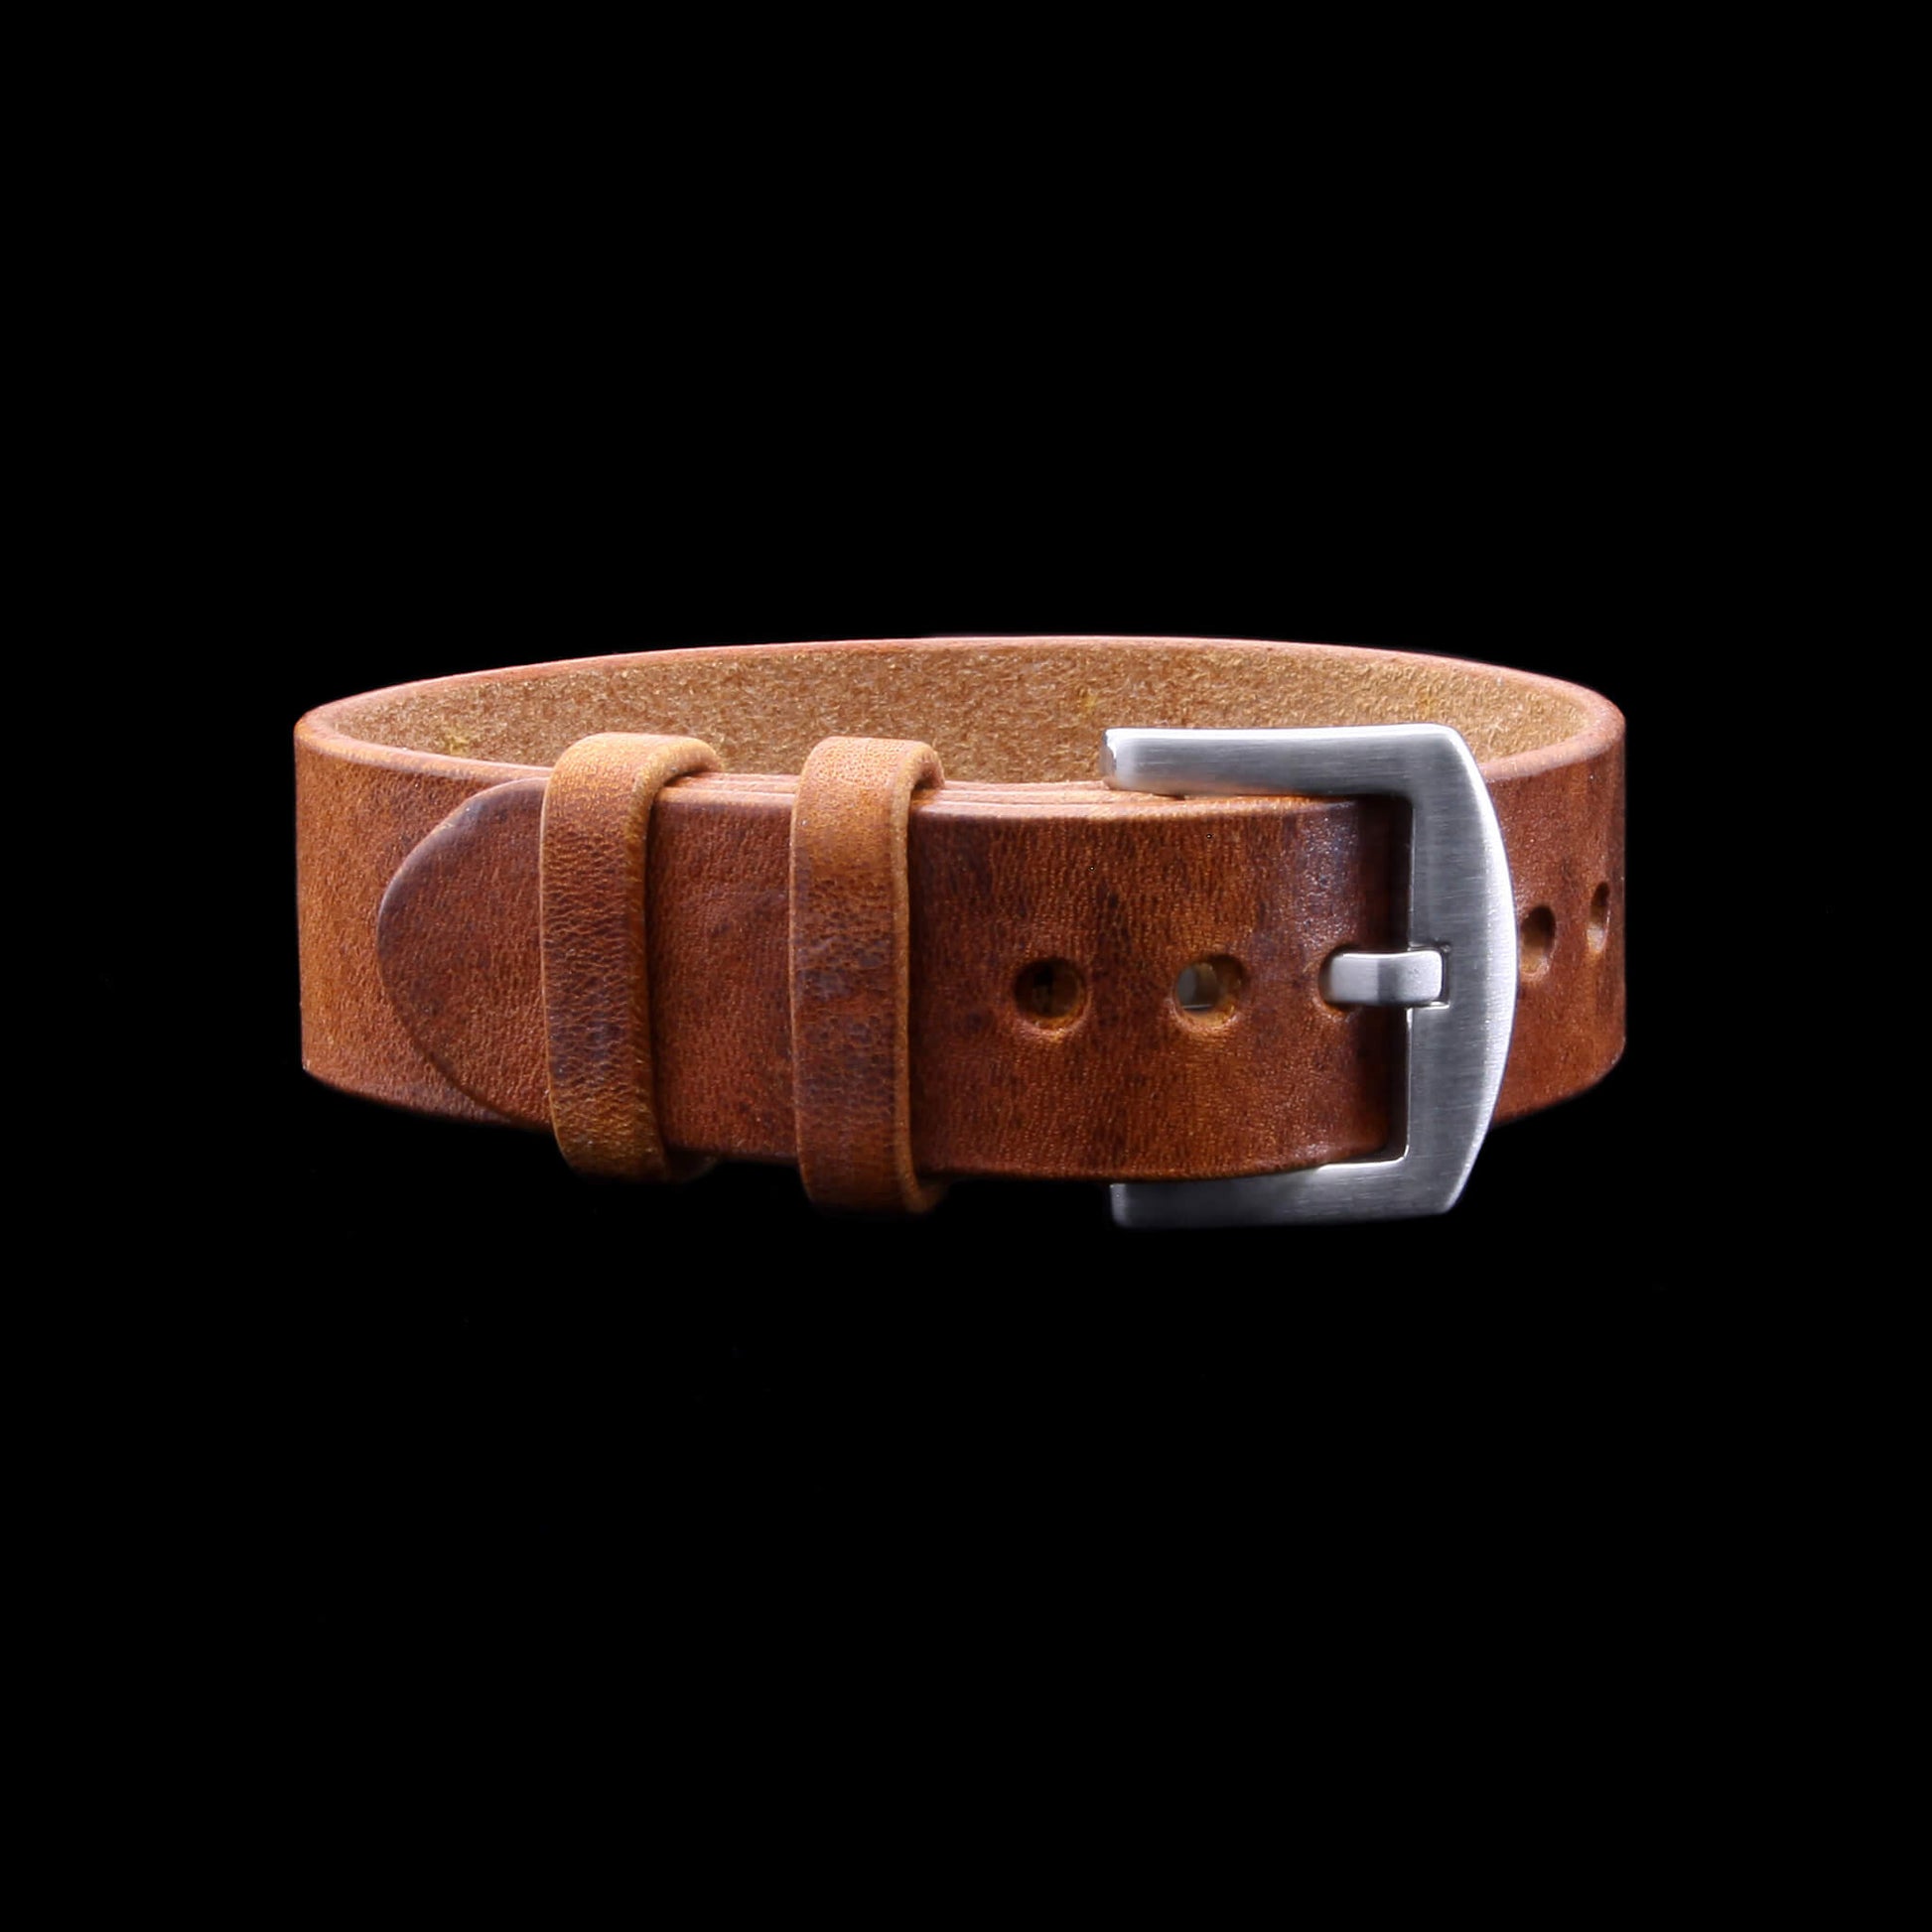 Single Pass Leather Watch Strap, 2-Keeper Style Vintage 403 | Full Grain Italian Vegetable-Tanned Leather | Cozy Handmade